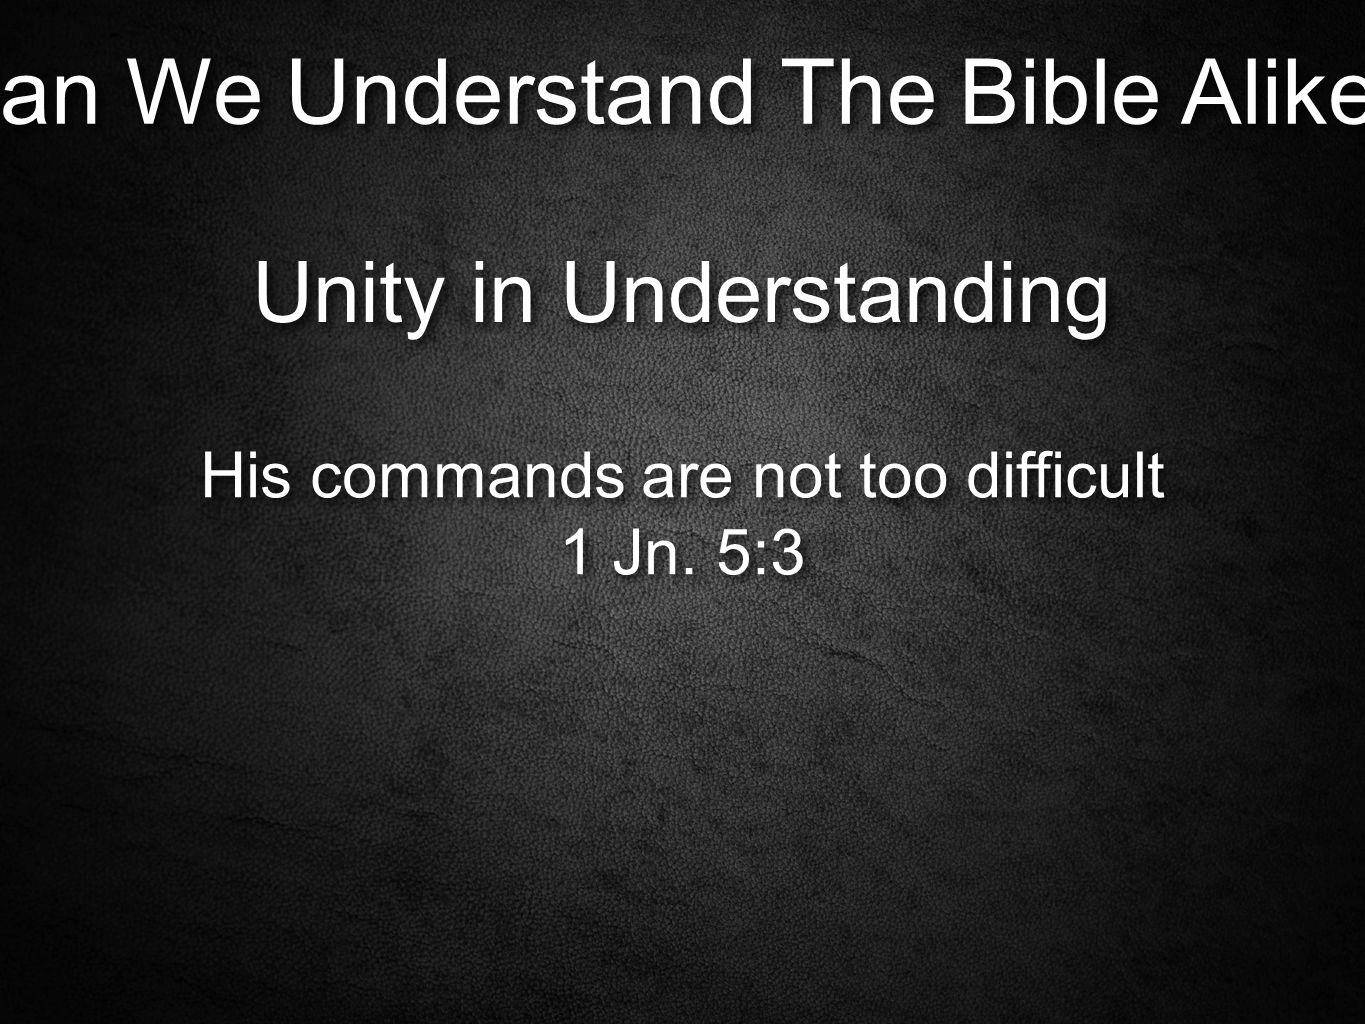 Can We Understand The Bible Alike. Unity in Understanding His commands are not too difficult 1 Jn.